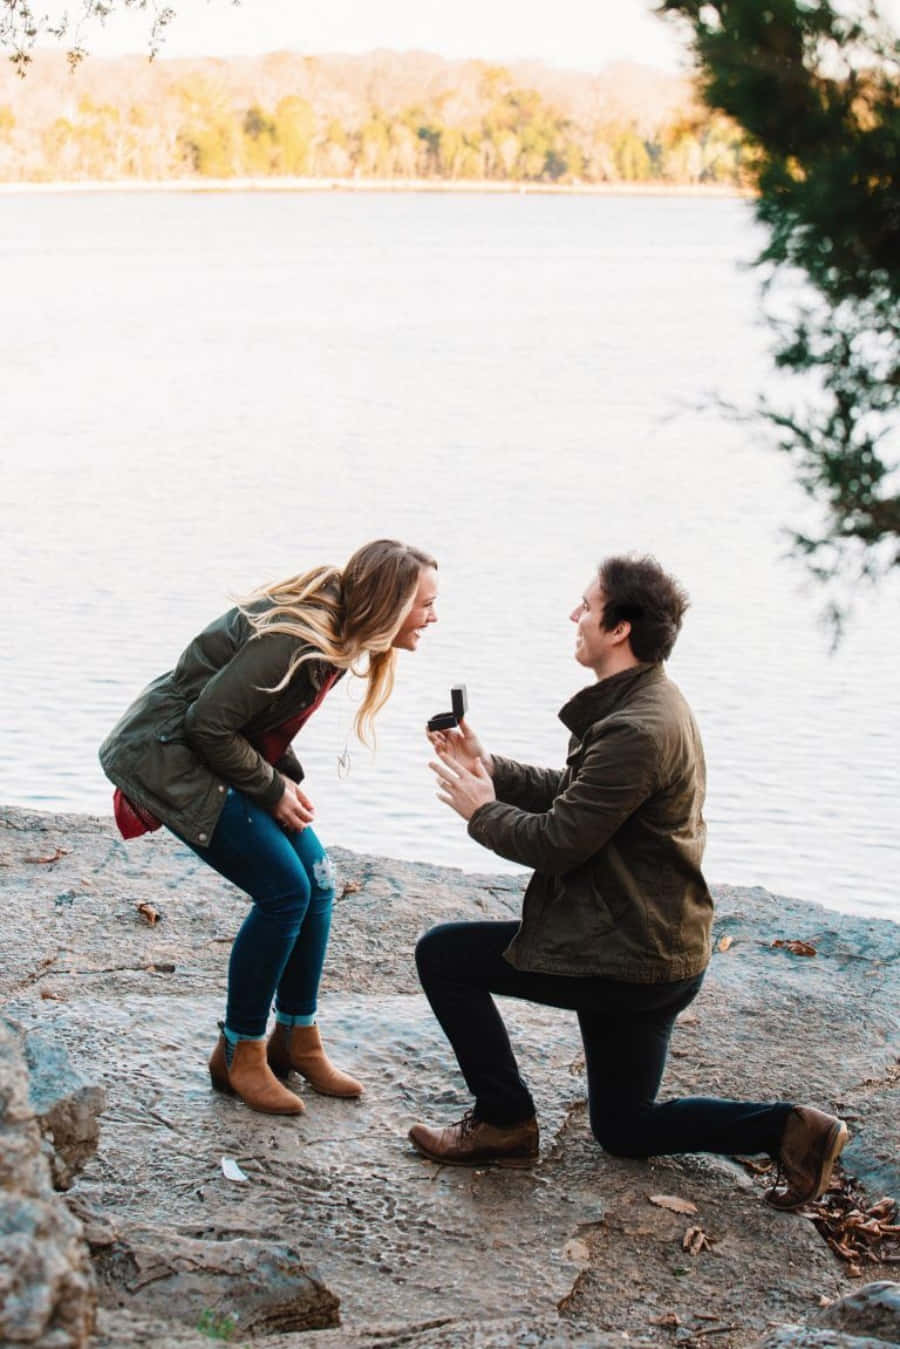 "A life-changing proposal."